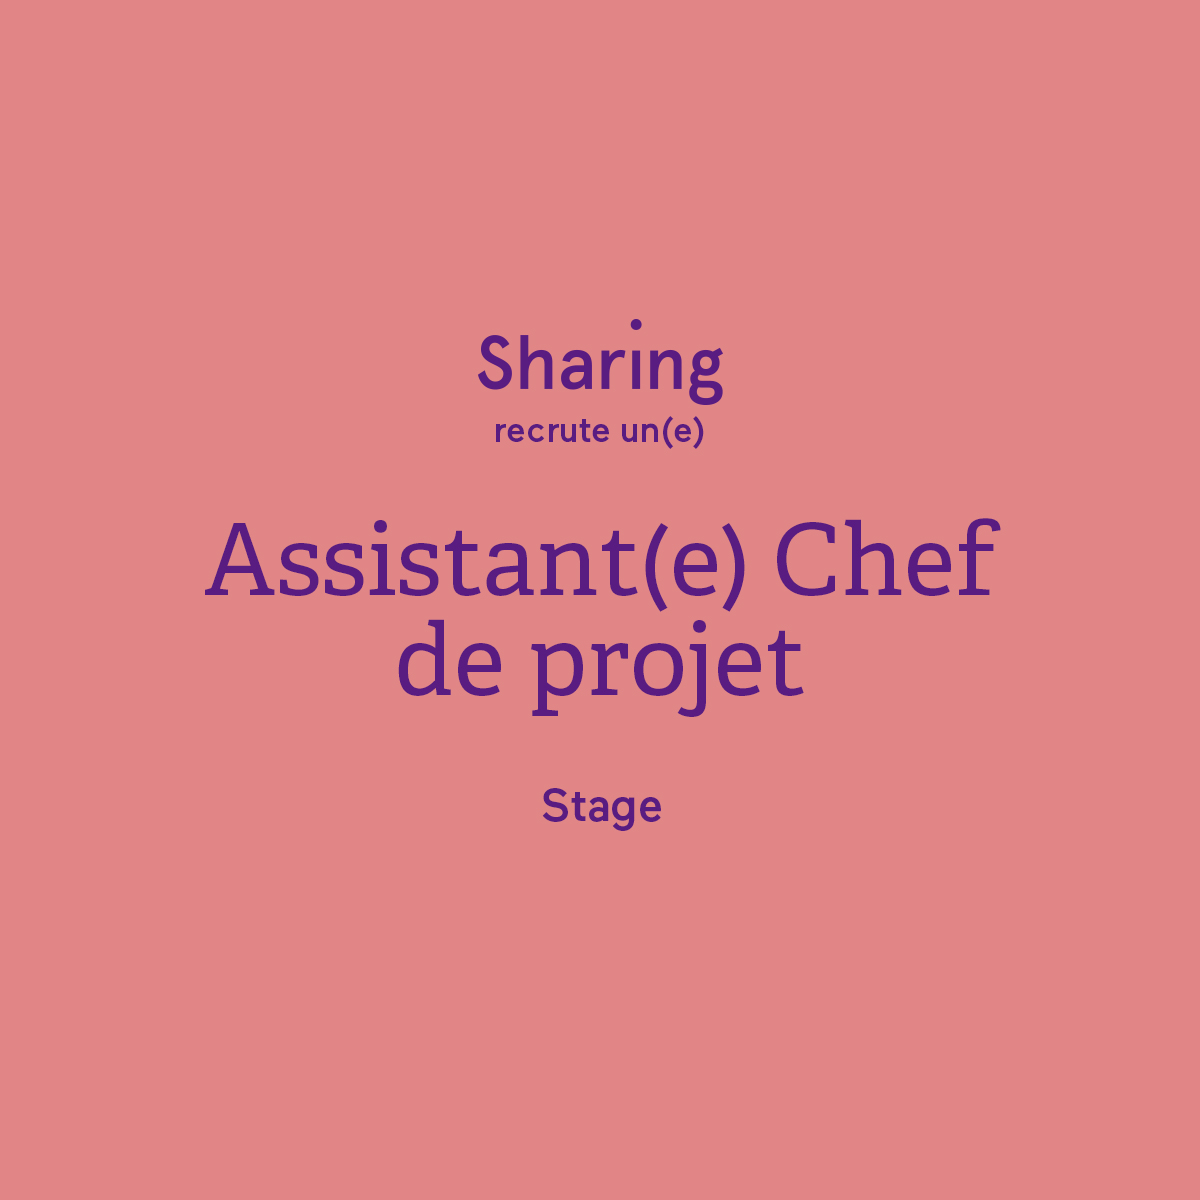 sharing recrute chef de projet communication stage